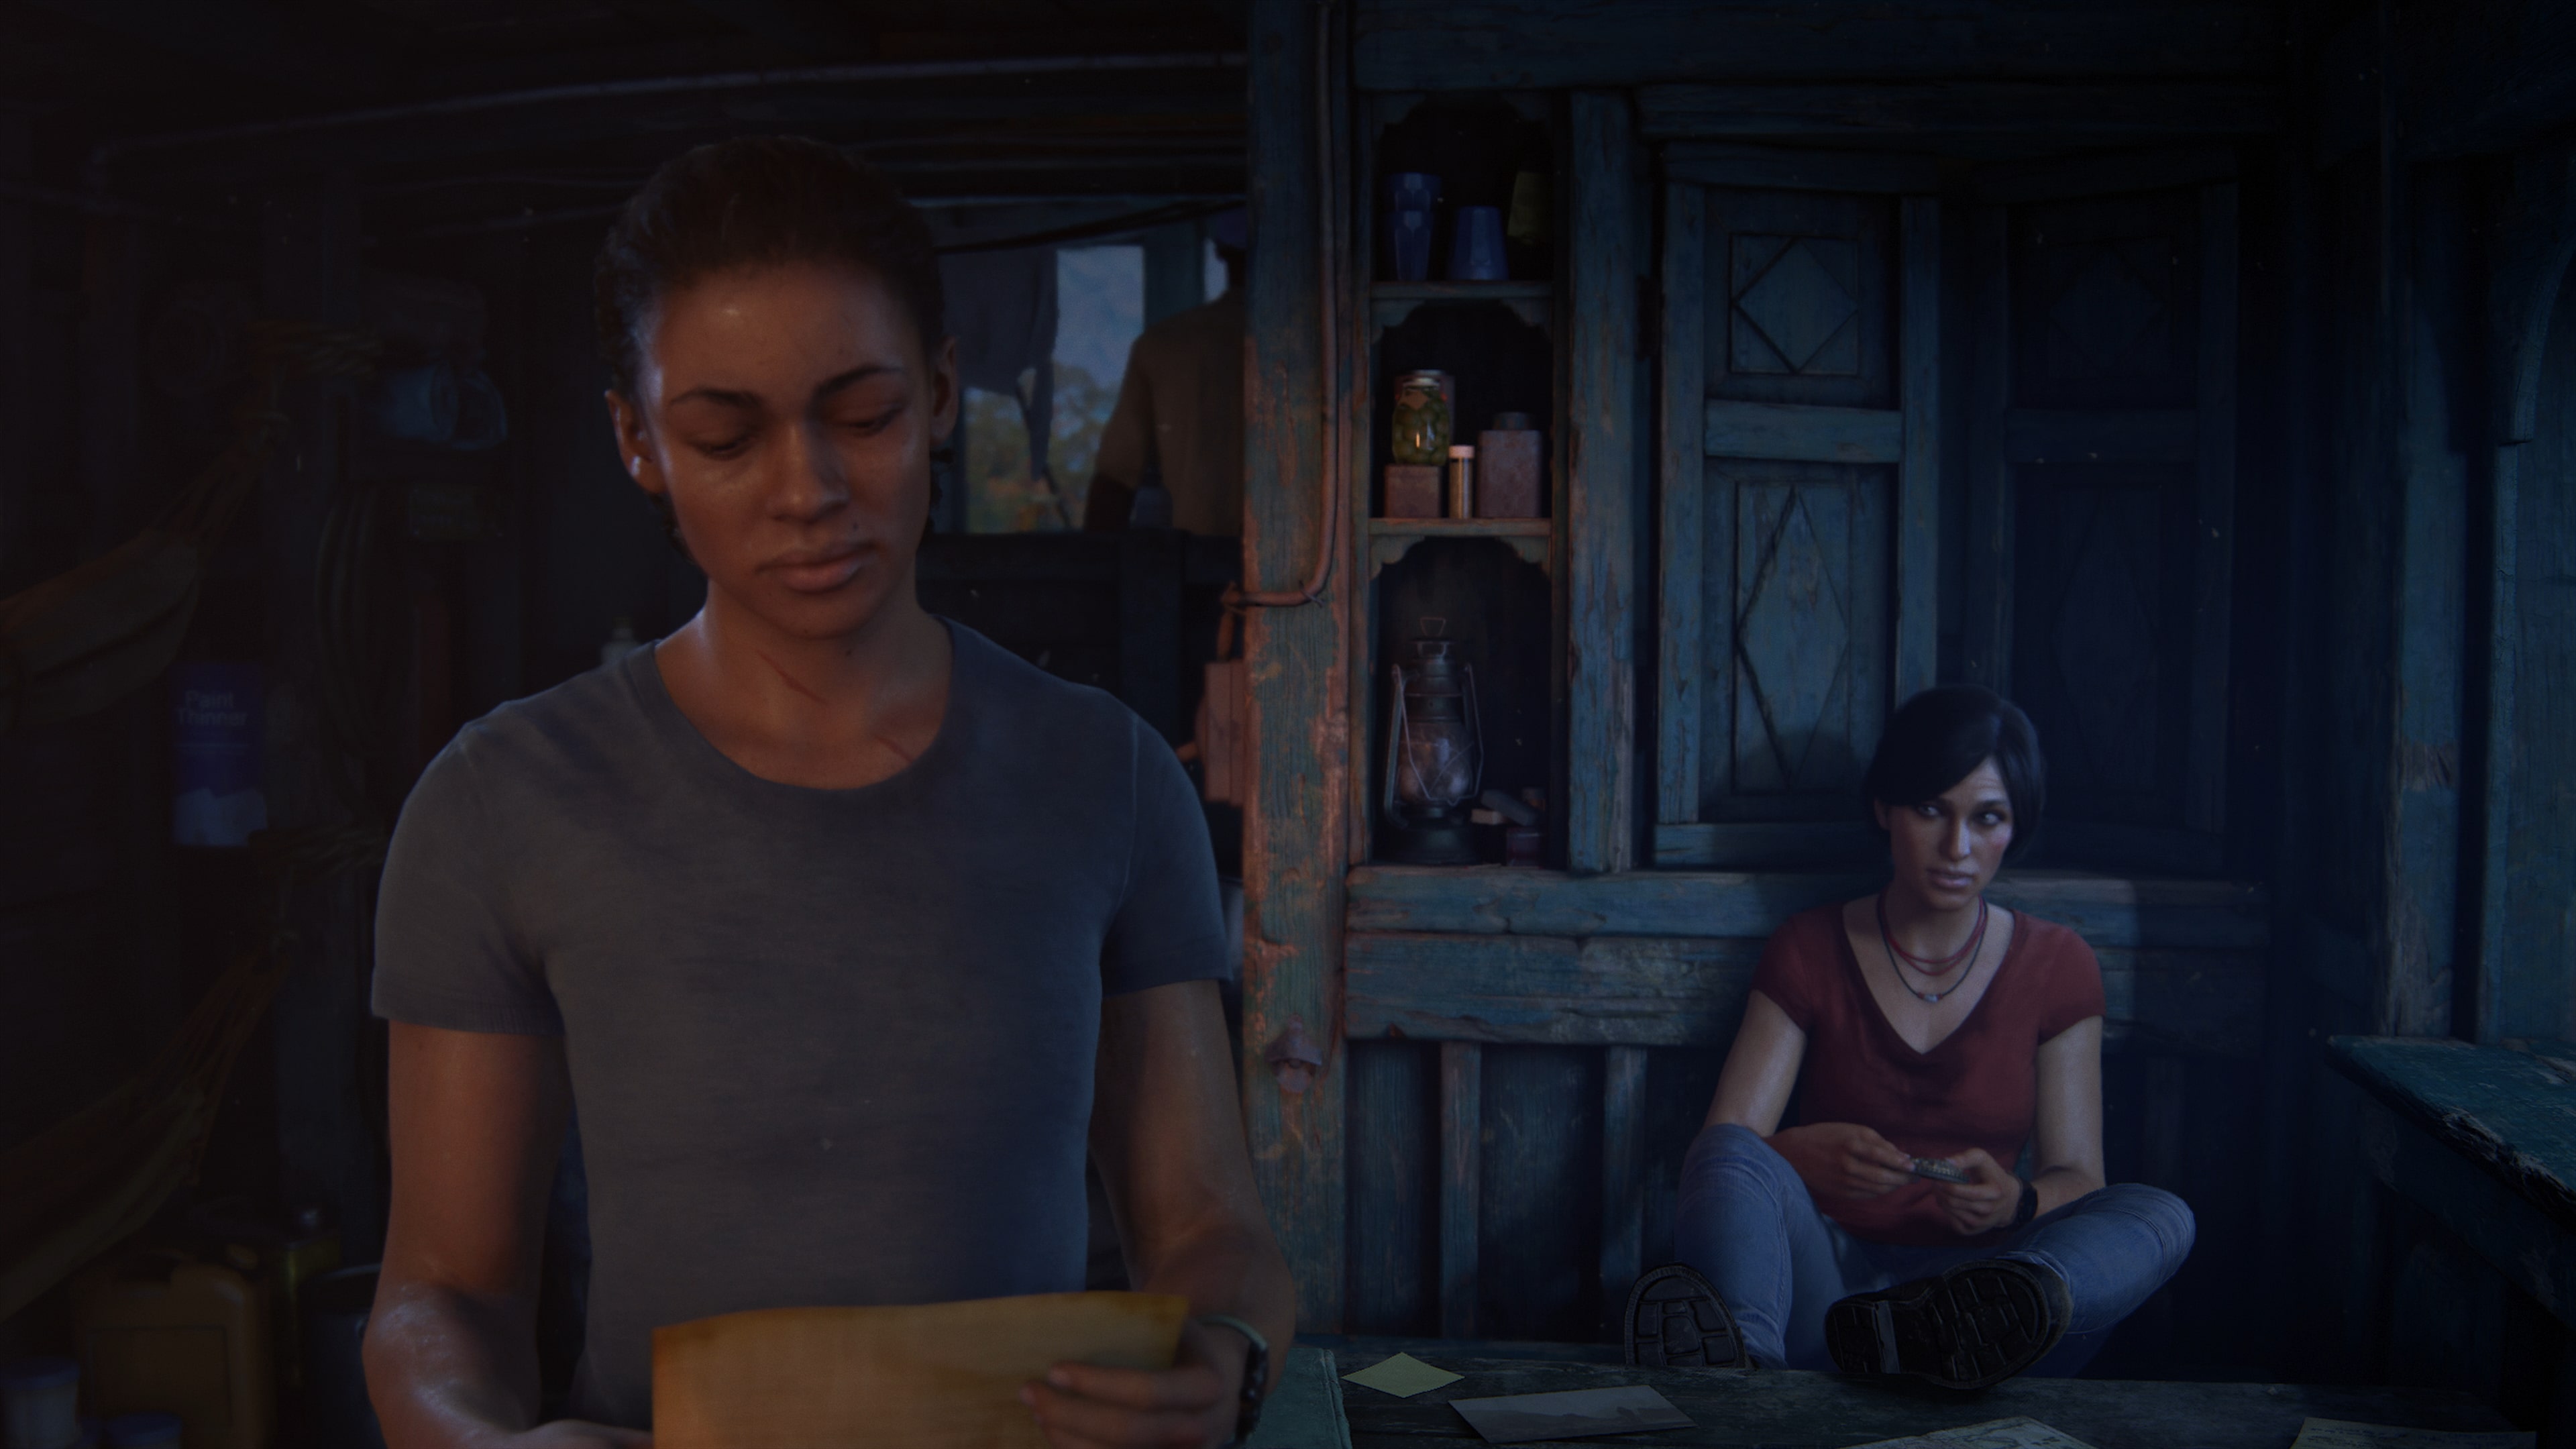 Uncharted: The Lost Legacy on PS4 — price history, screenshots, discounts •  USA